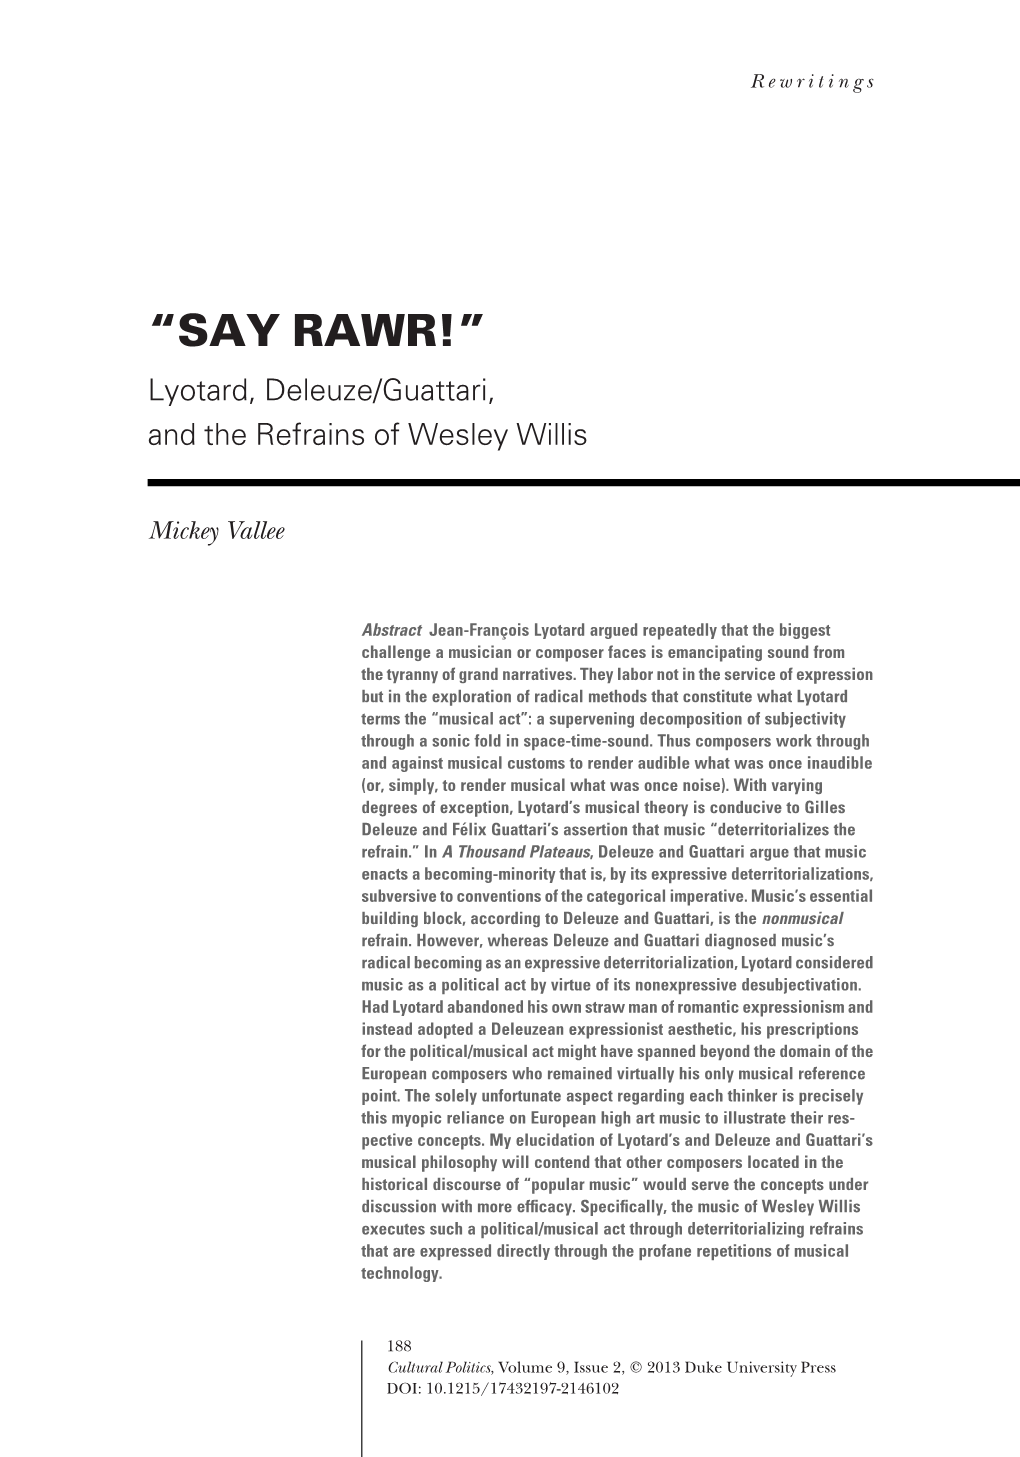 “SAY RAWR!” Lyotard, Deleuze/Guattari, and the Refrains of Wesley Willis